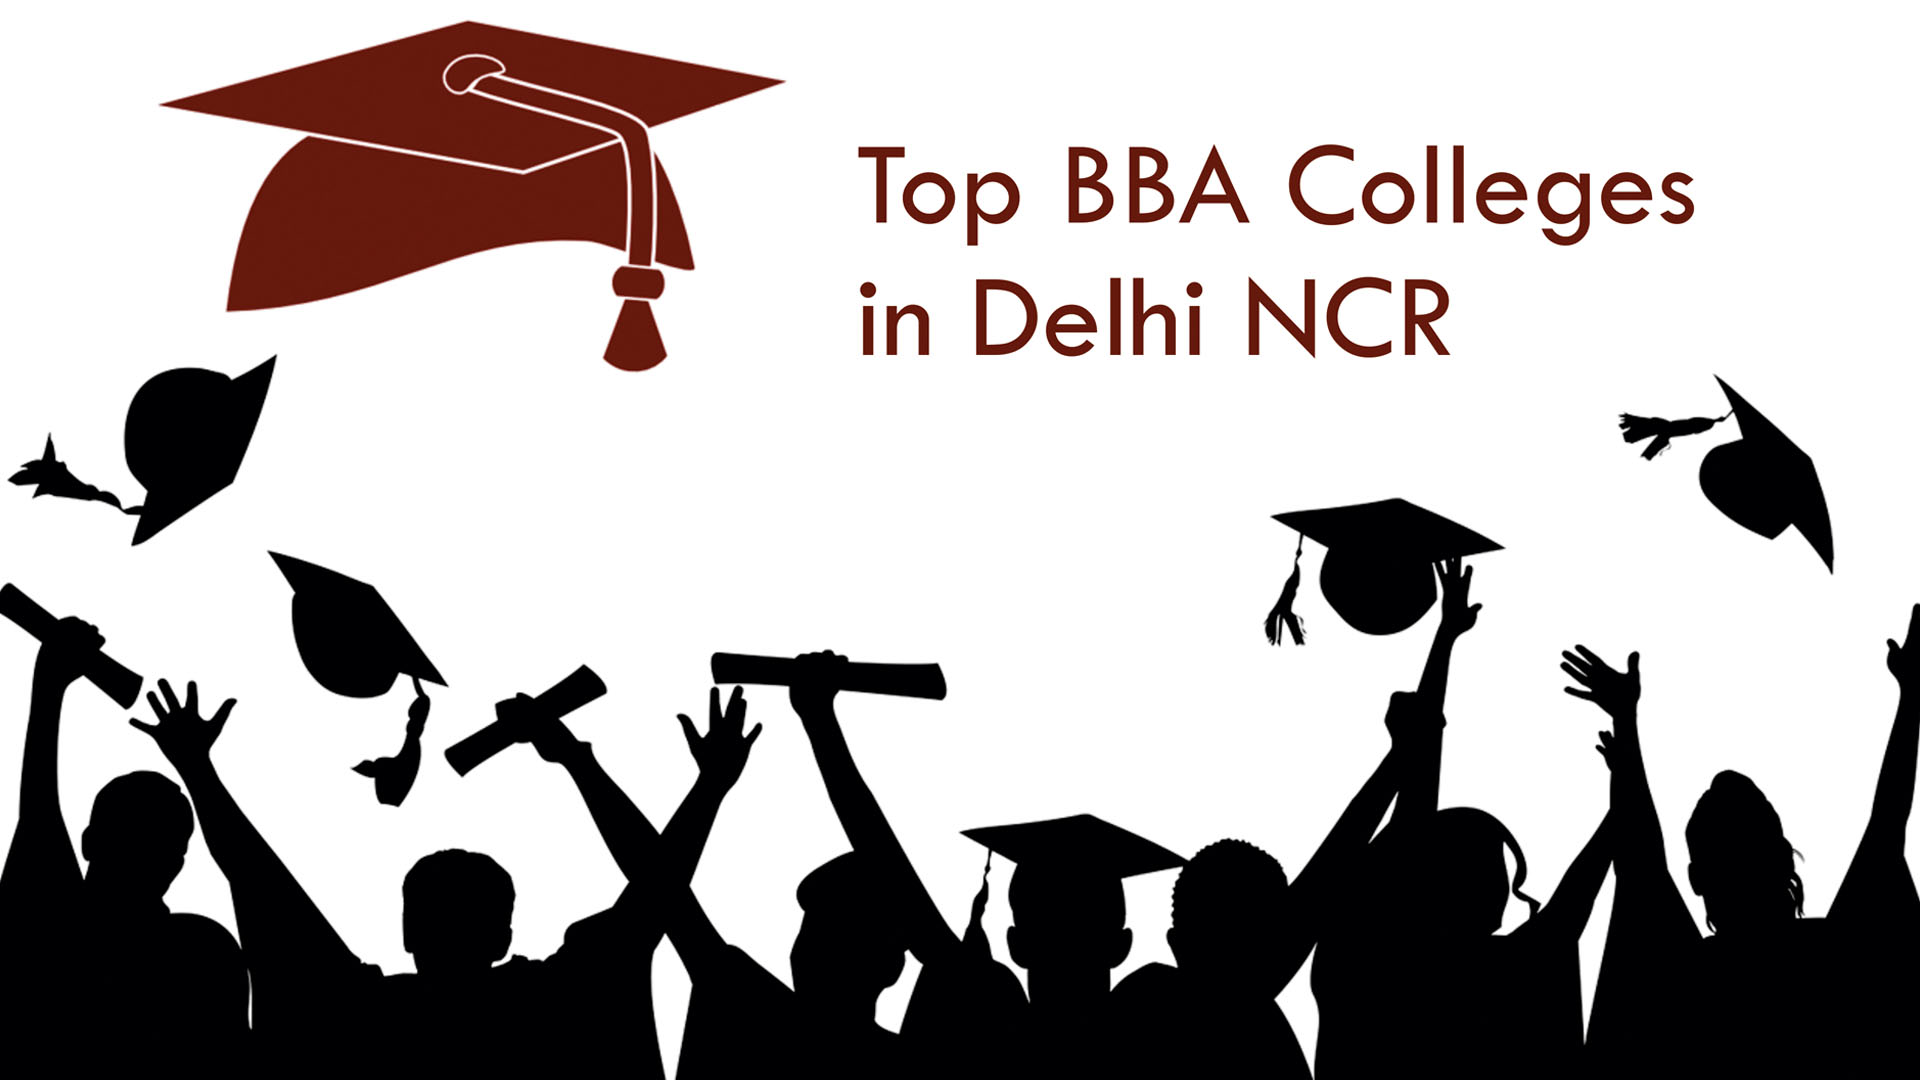 How to Choose Best BBA College in DelhI NCR